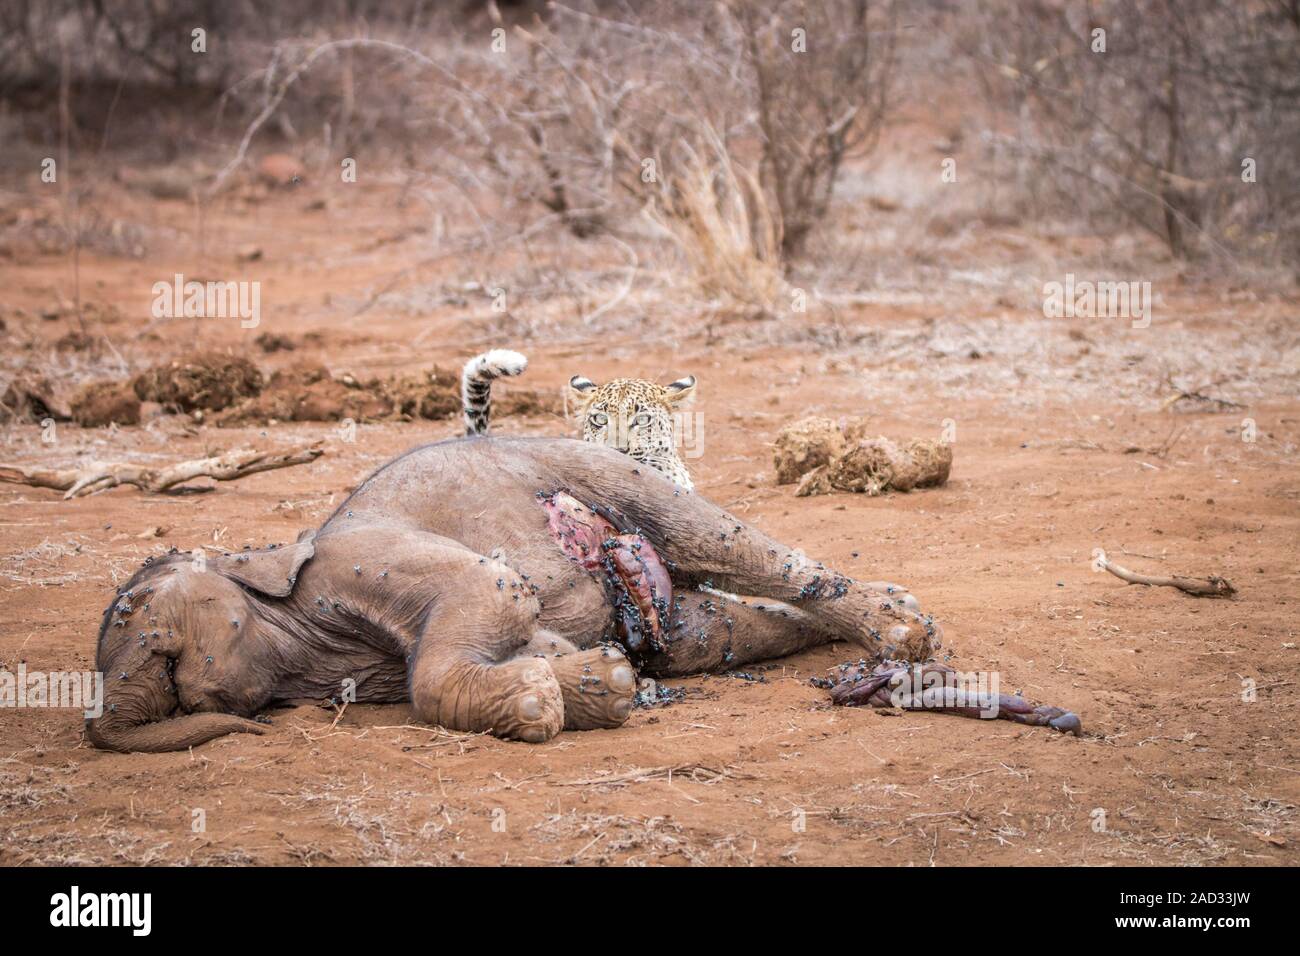 Leopard at a baby Elephant carcass. Stock Photo